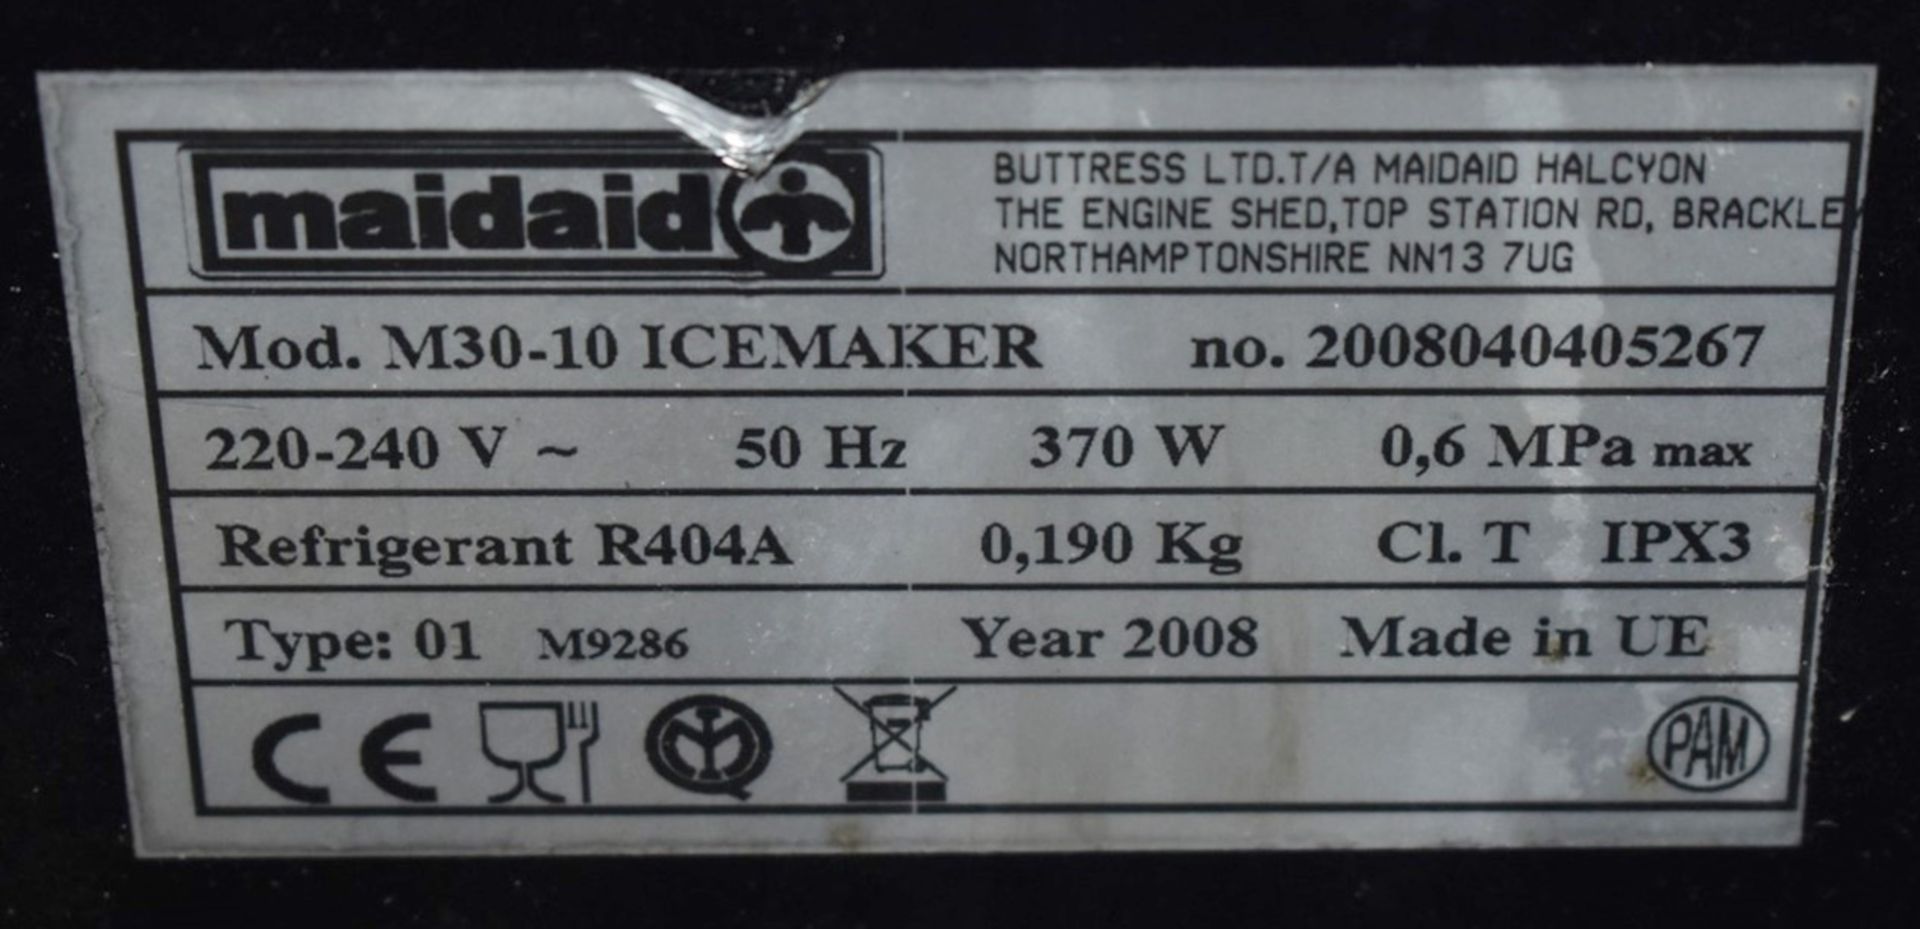 1 x Maidaid M30-10 Countertop Ice Machine With Stainless Steel Exterior - RRP £975 - Ref: WH2-115 - Image 8 of 9